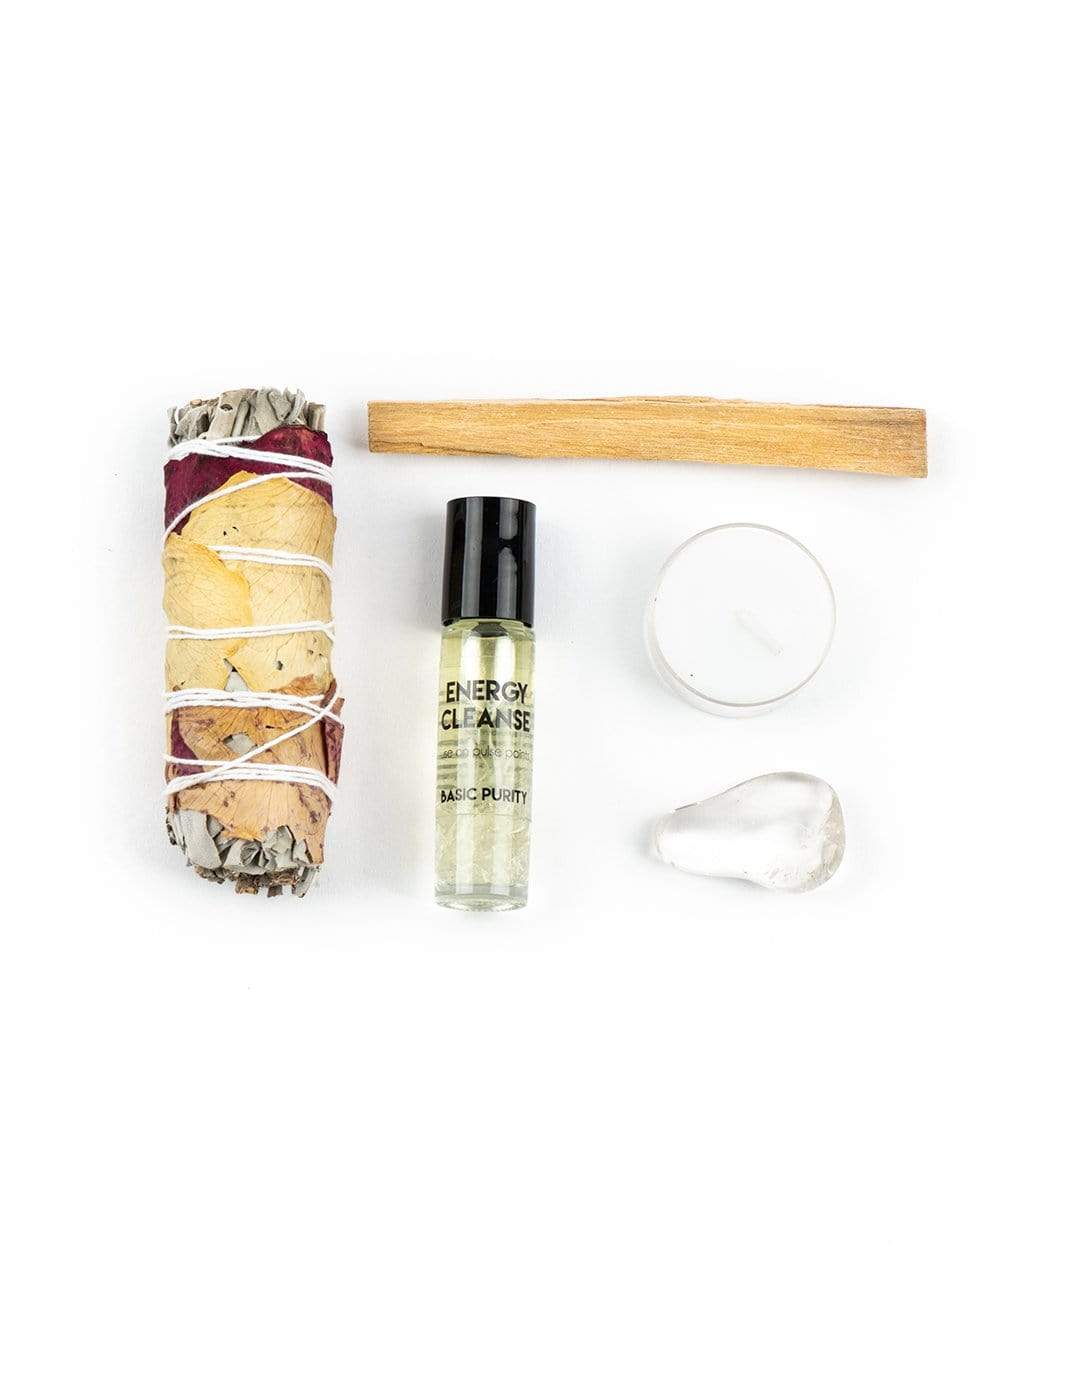 energy cleansing kit by Mary Armendarez